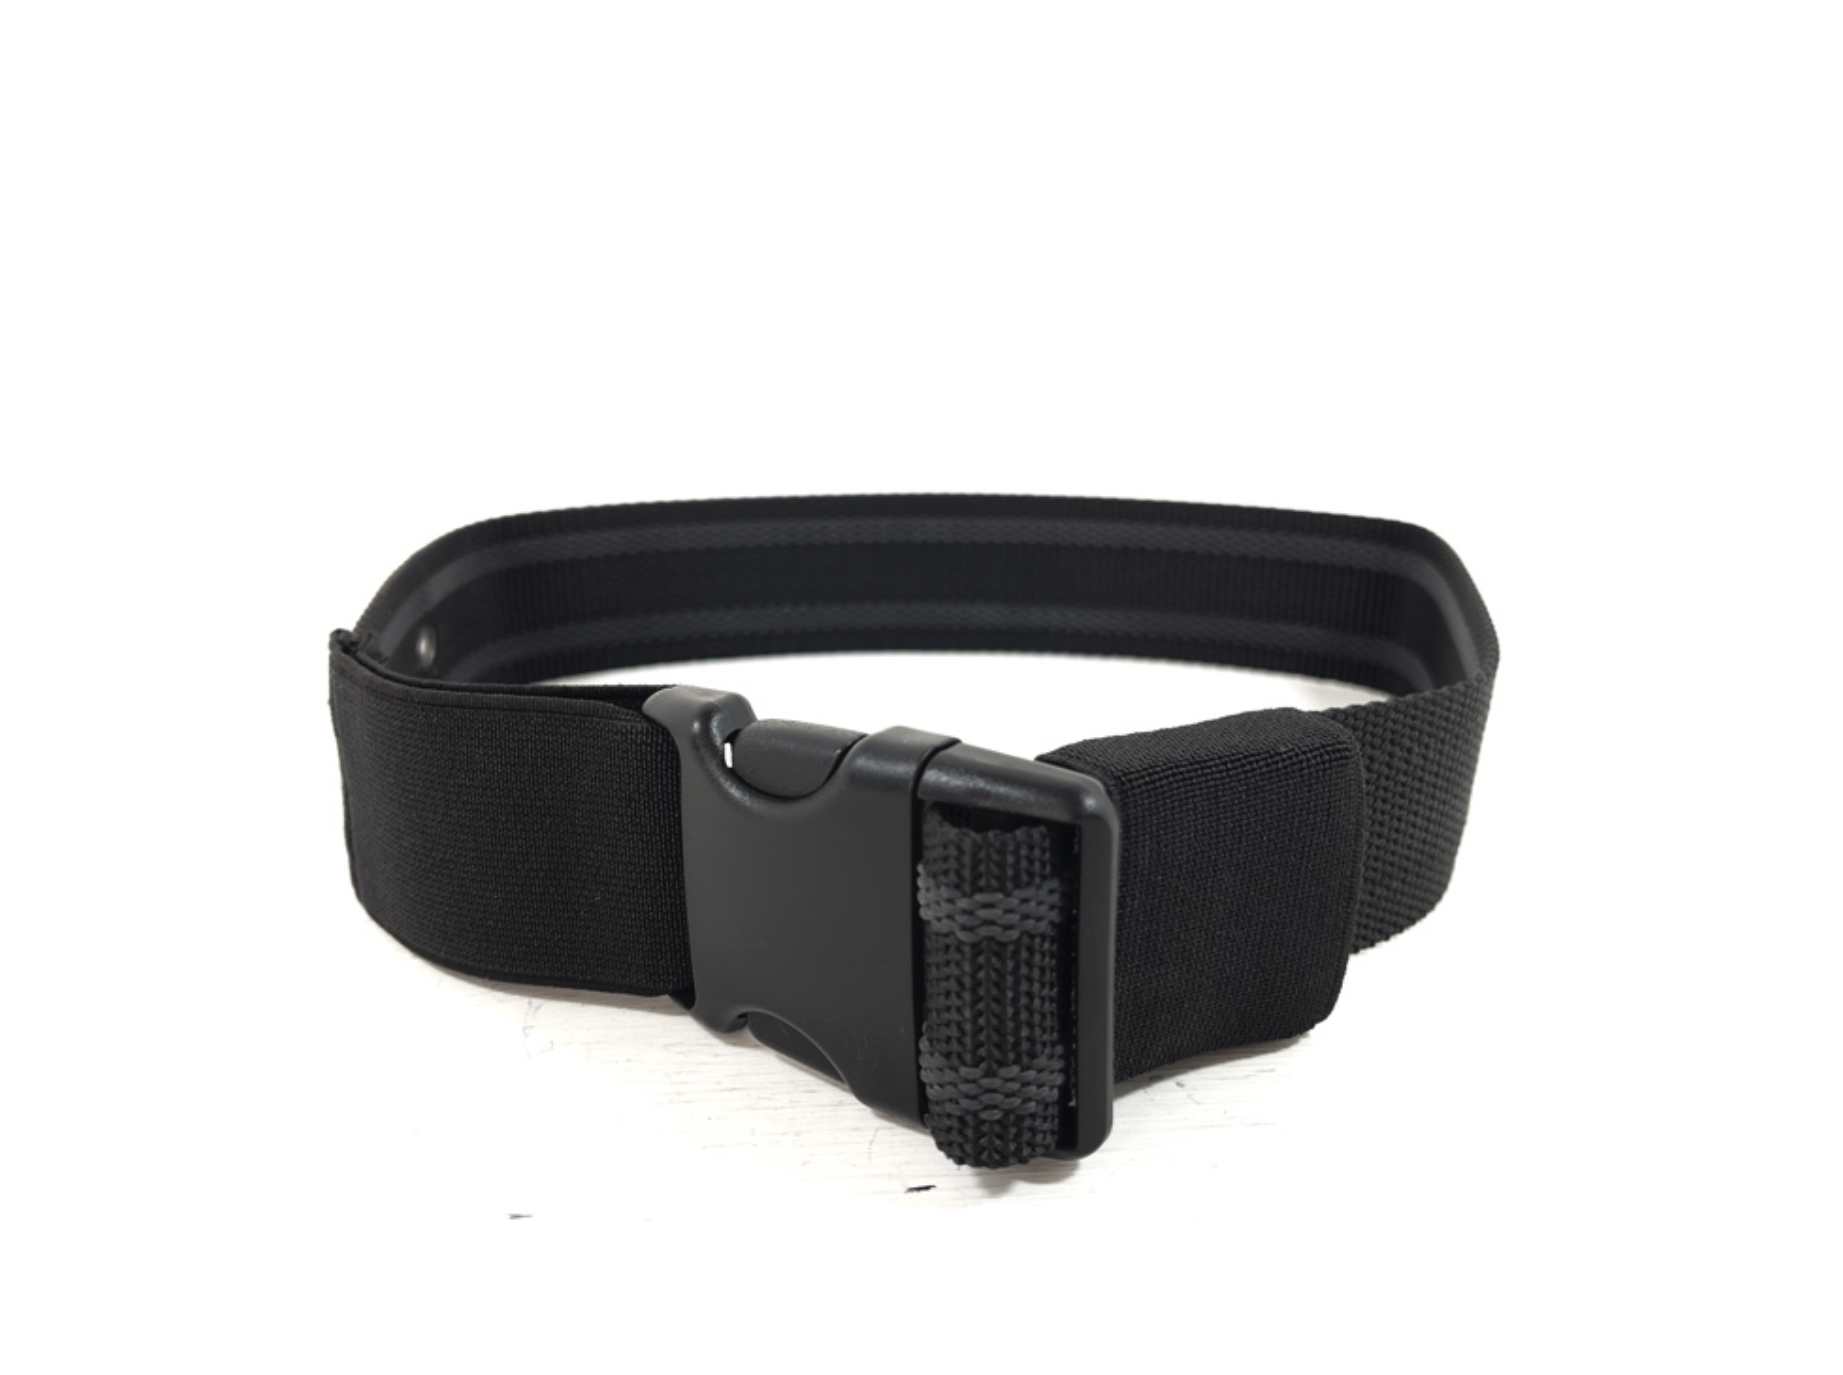 Black leg / thigh strap for mid ride mounts and holsters – Extreme